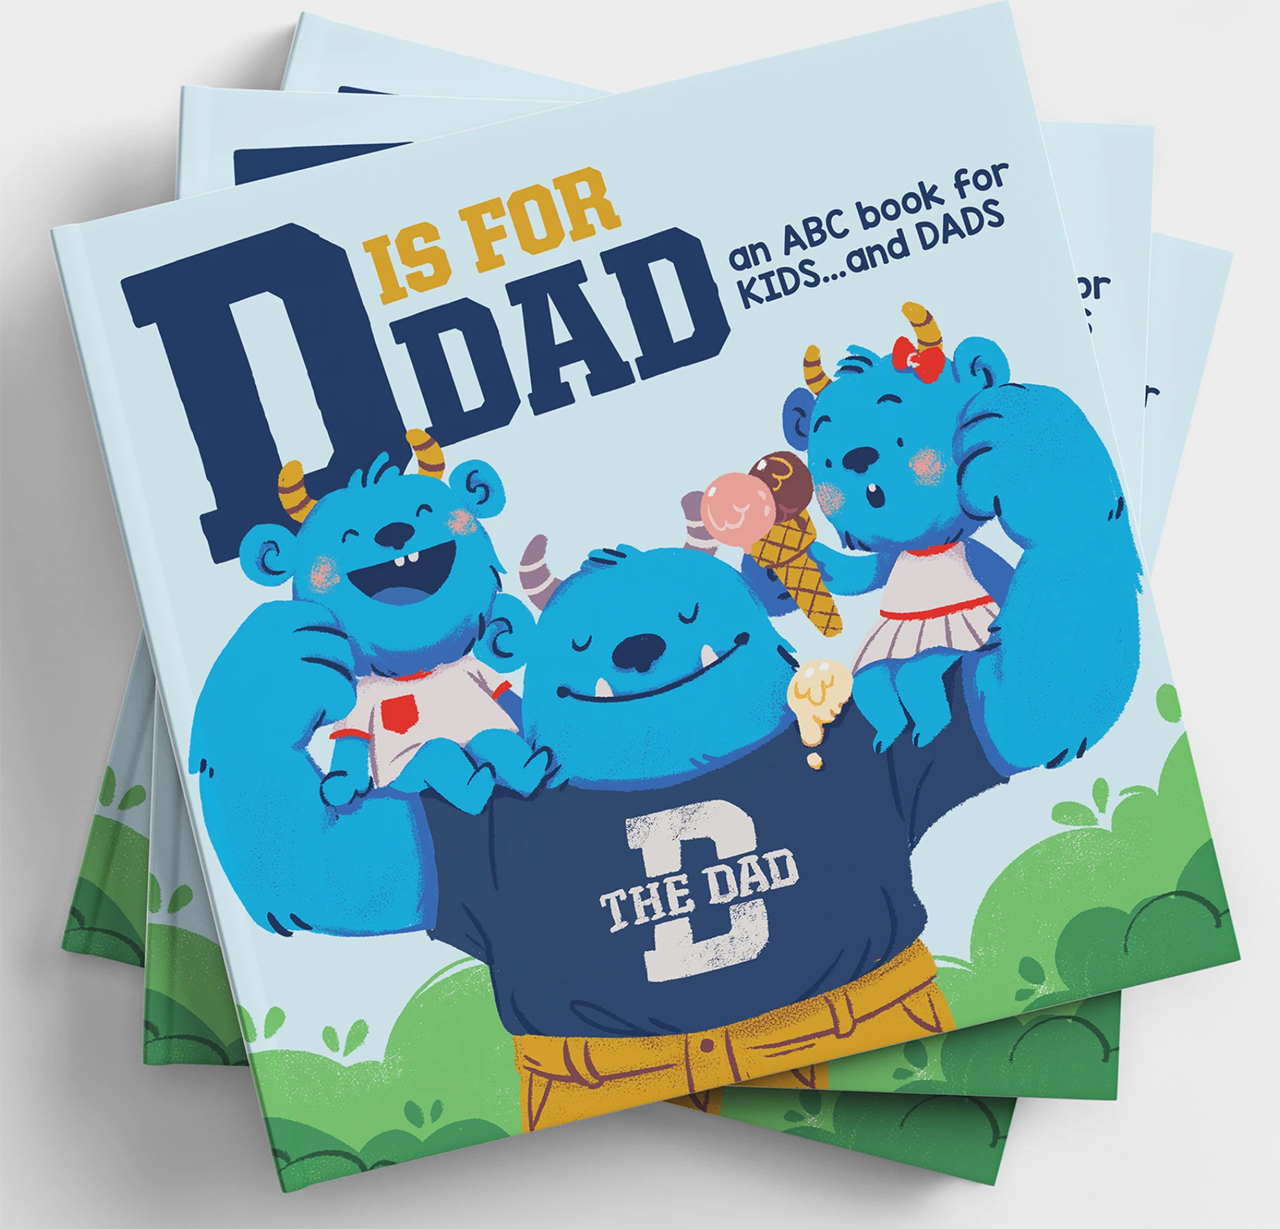 D is for Dad